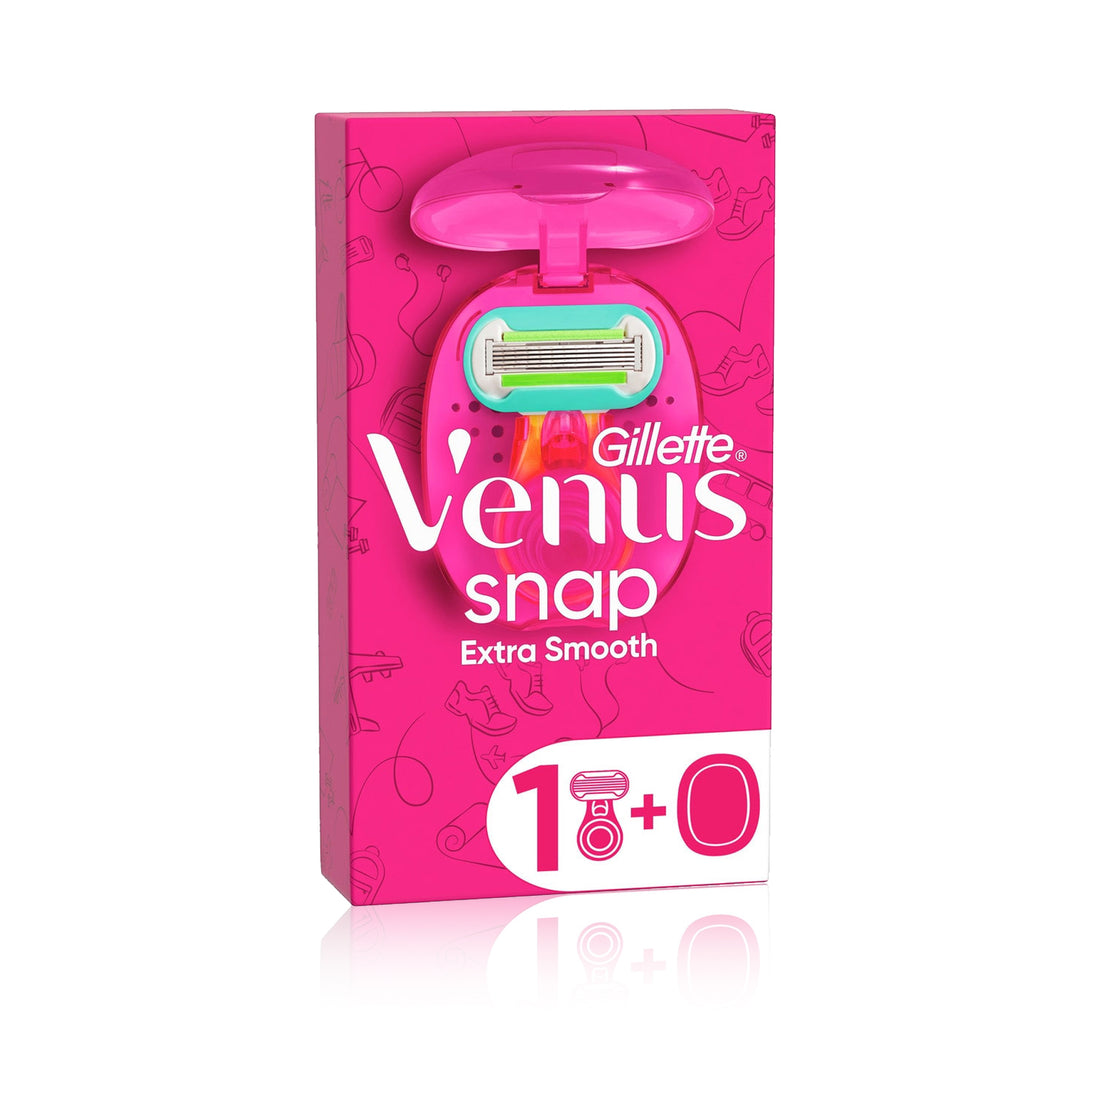 Gillette Venus Snap Extra Smooth Shapilatory Machine With 1 Recharge